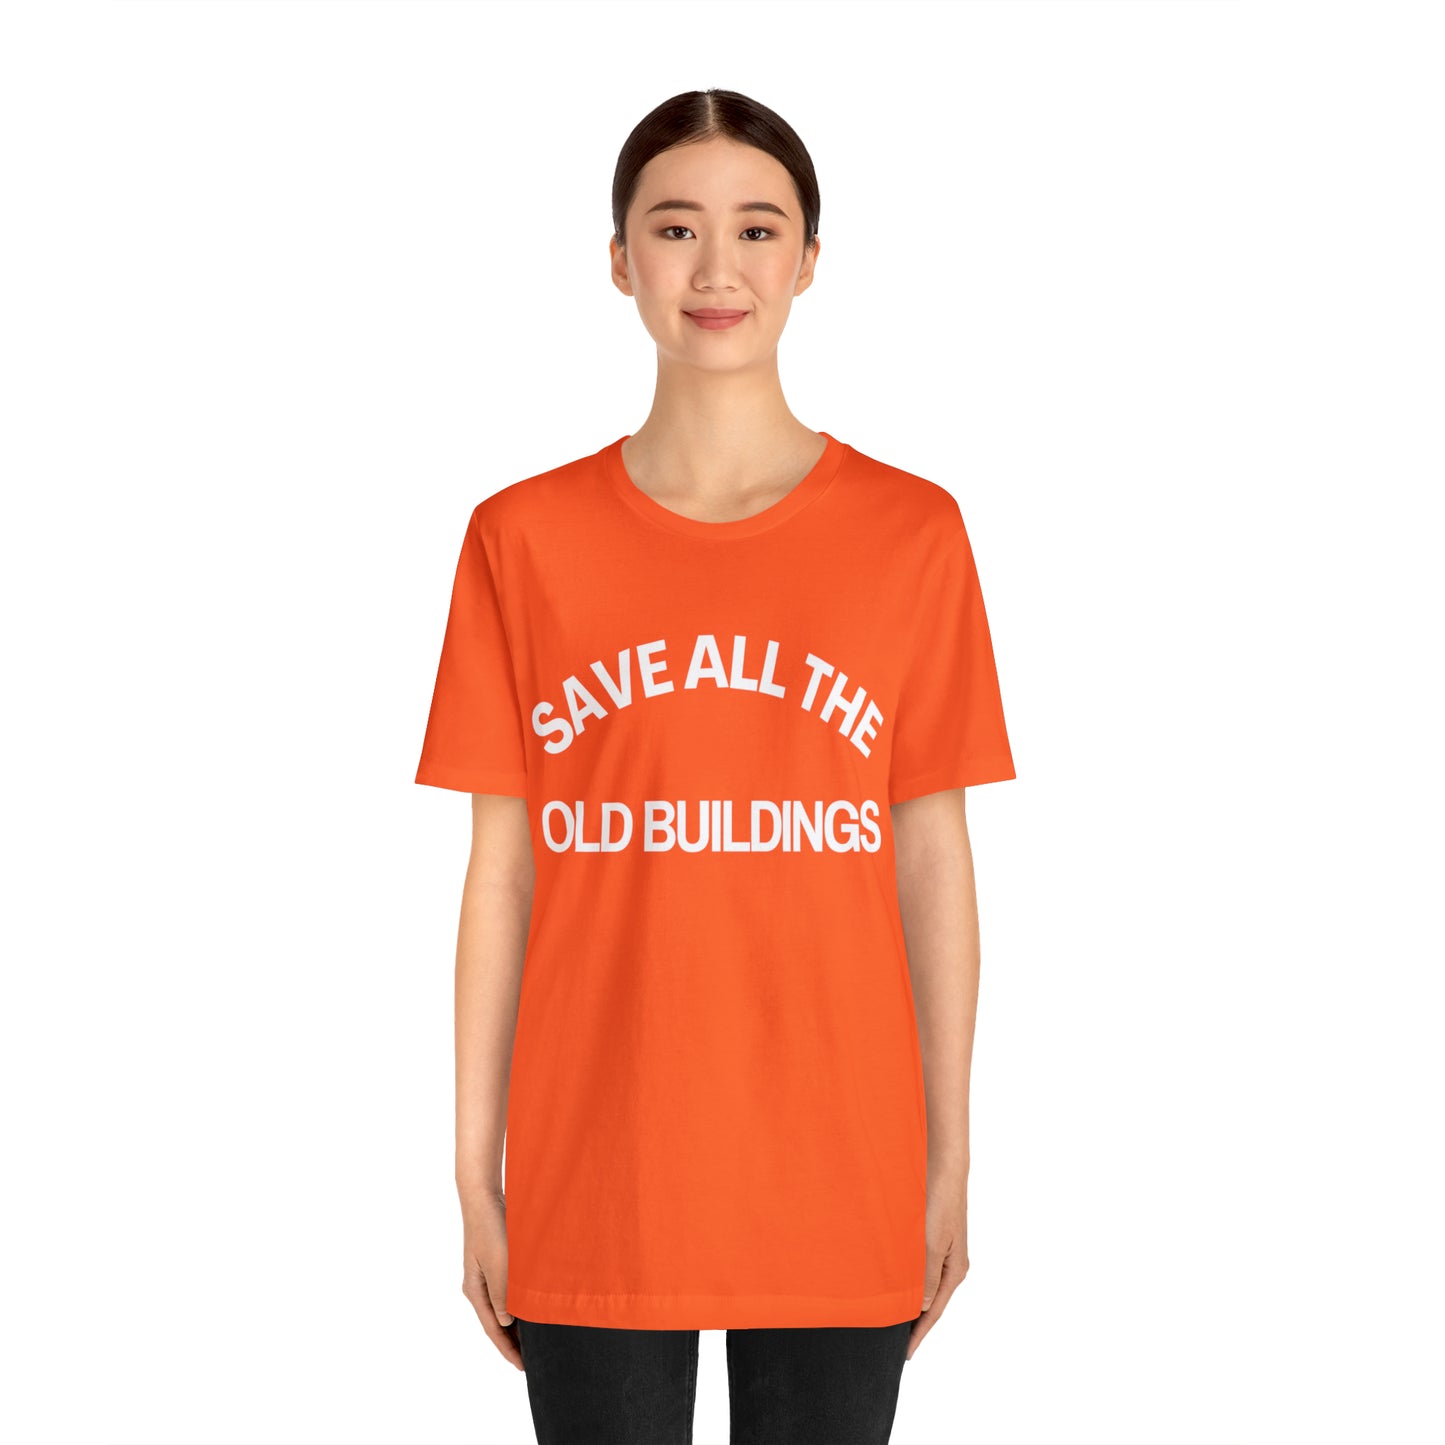 Save all the Old Buildings | Unisex T-Shirt